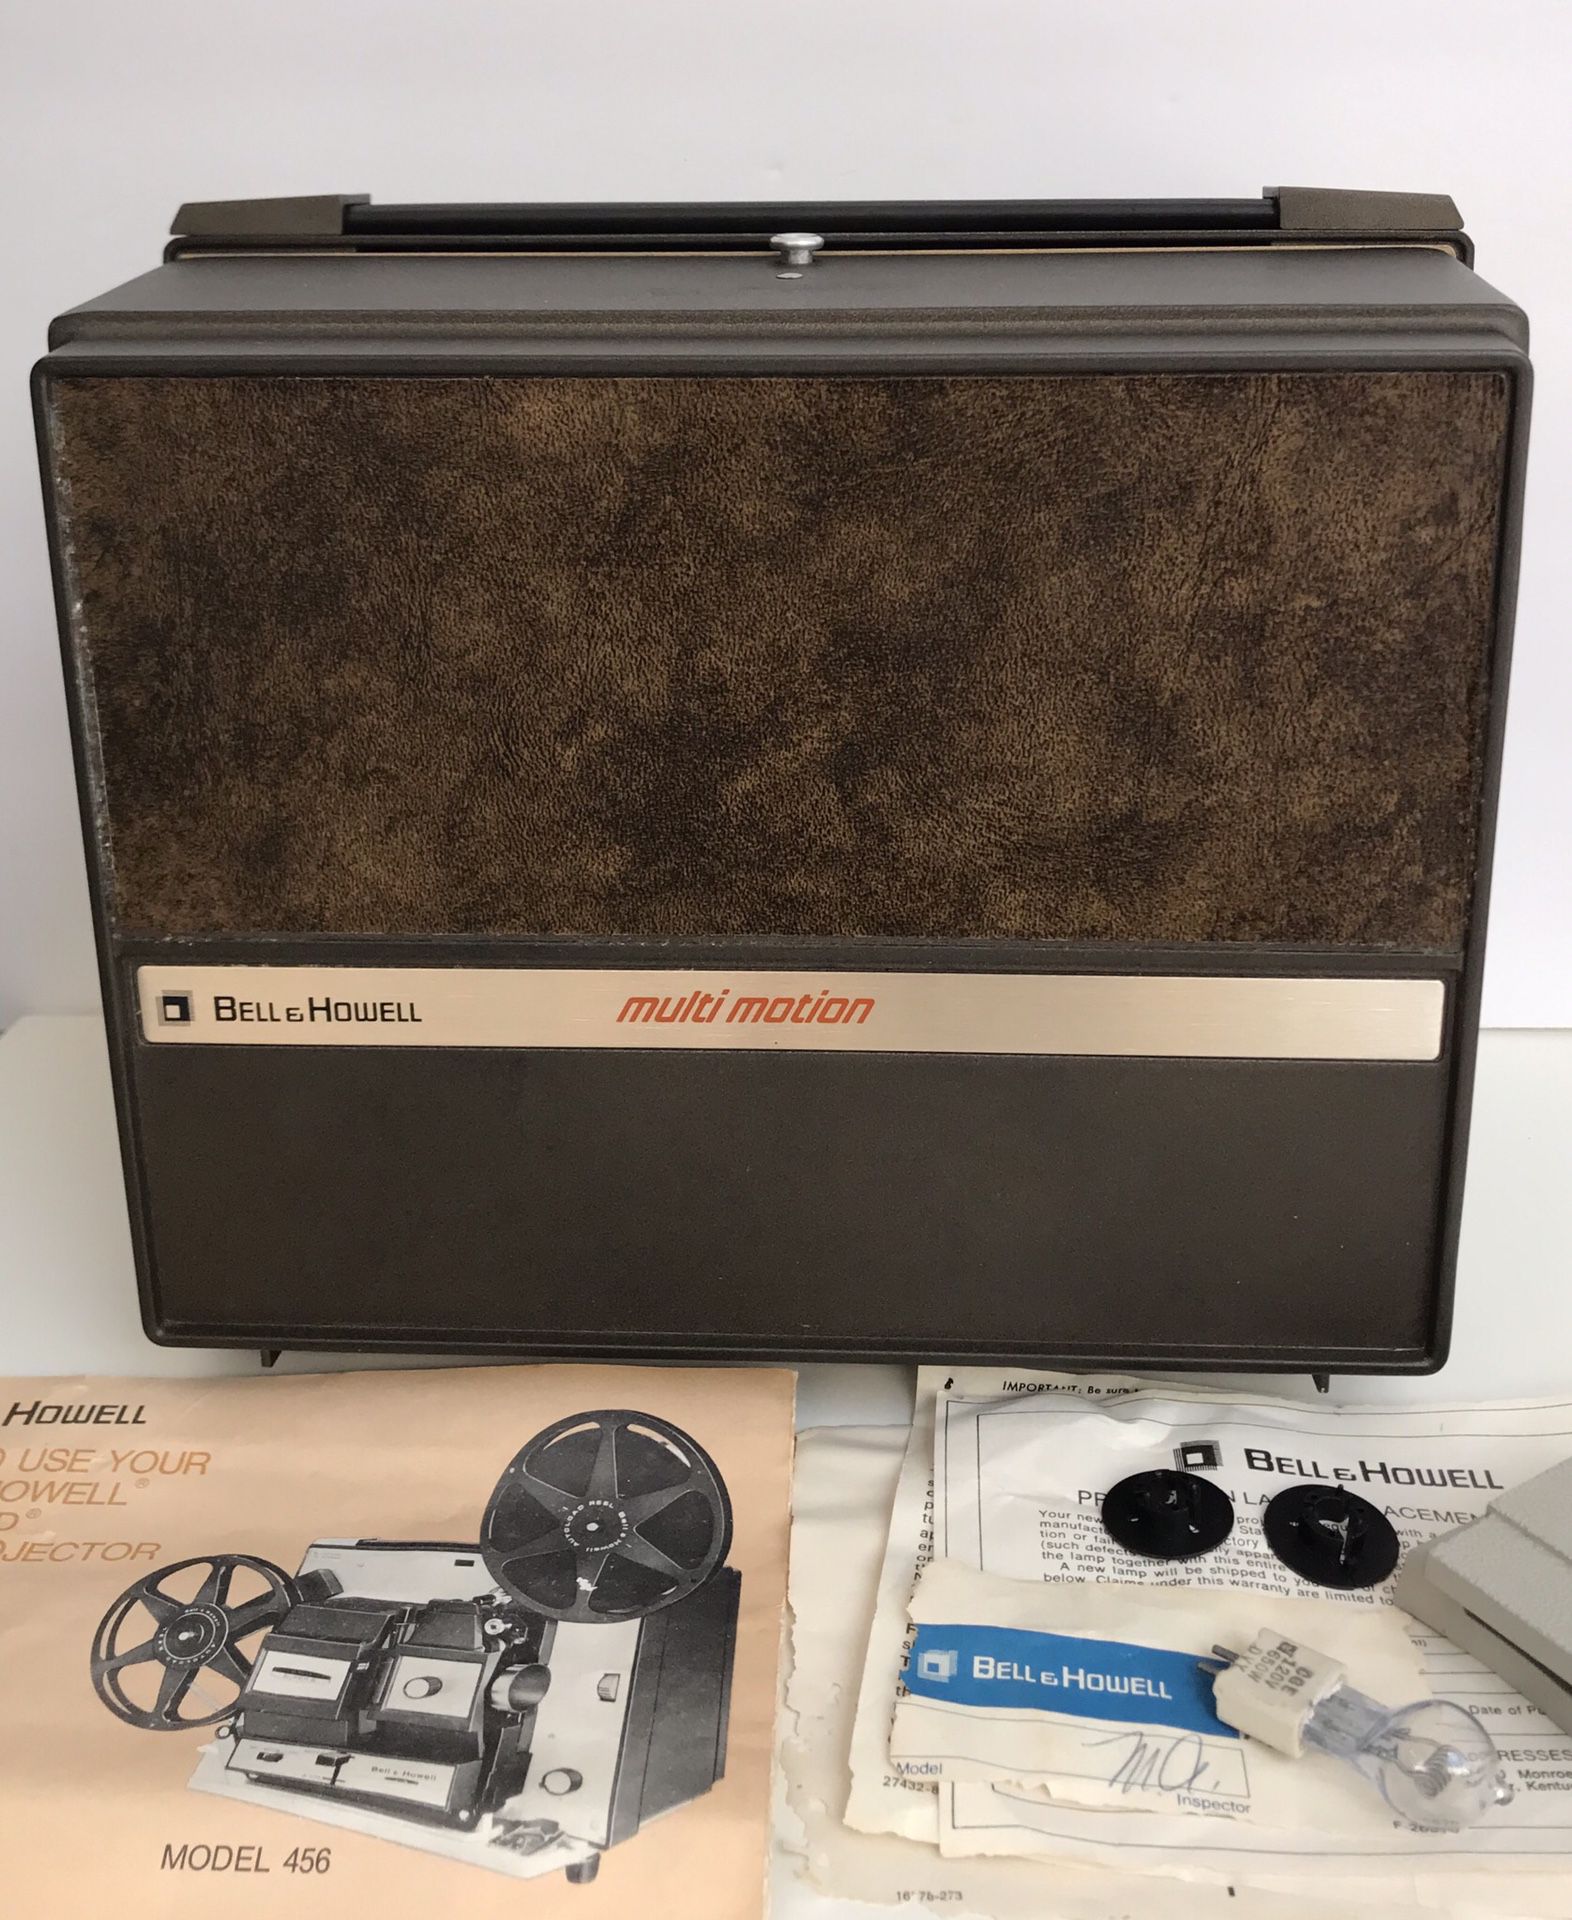 Bell & Howell super 8 & regular 8mm movie projector tested and ready to go